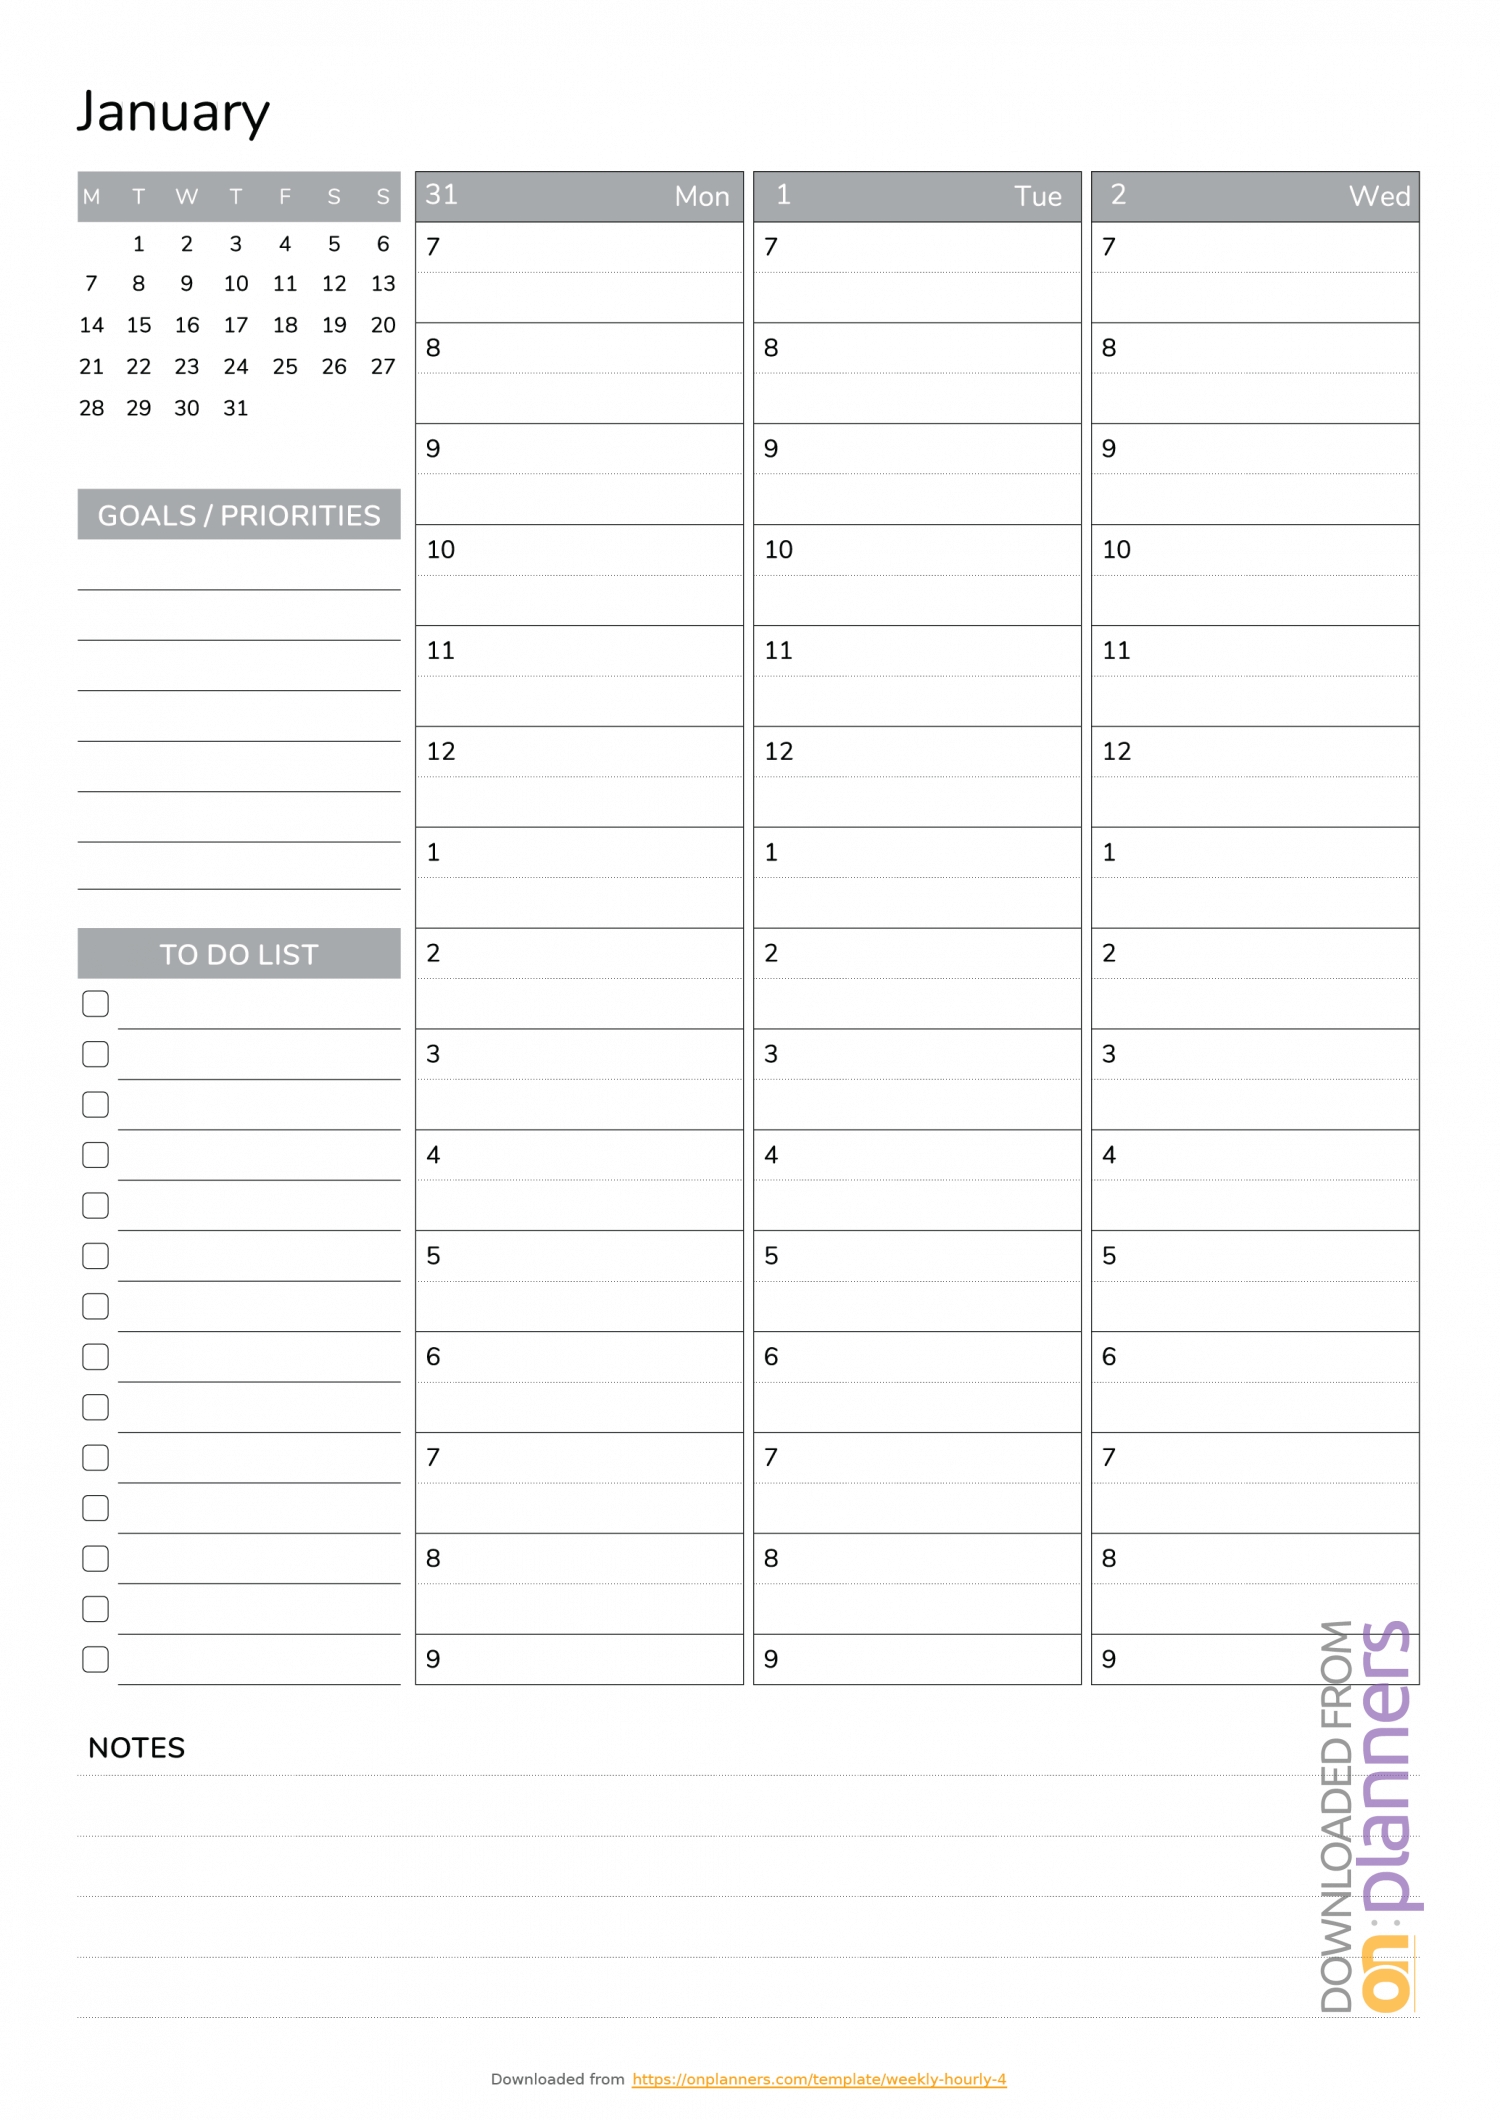 The Best Weekly Schedule Templates. Organize Your Time 4 Person Calendar Template